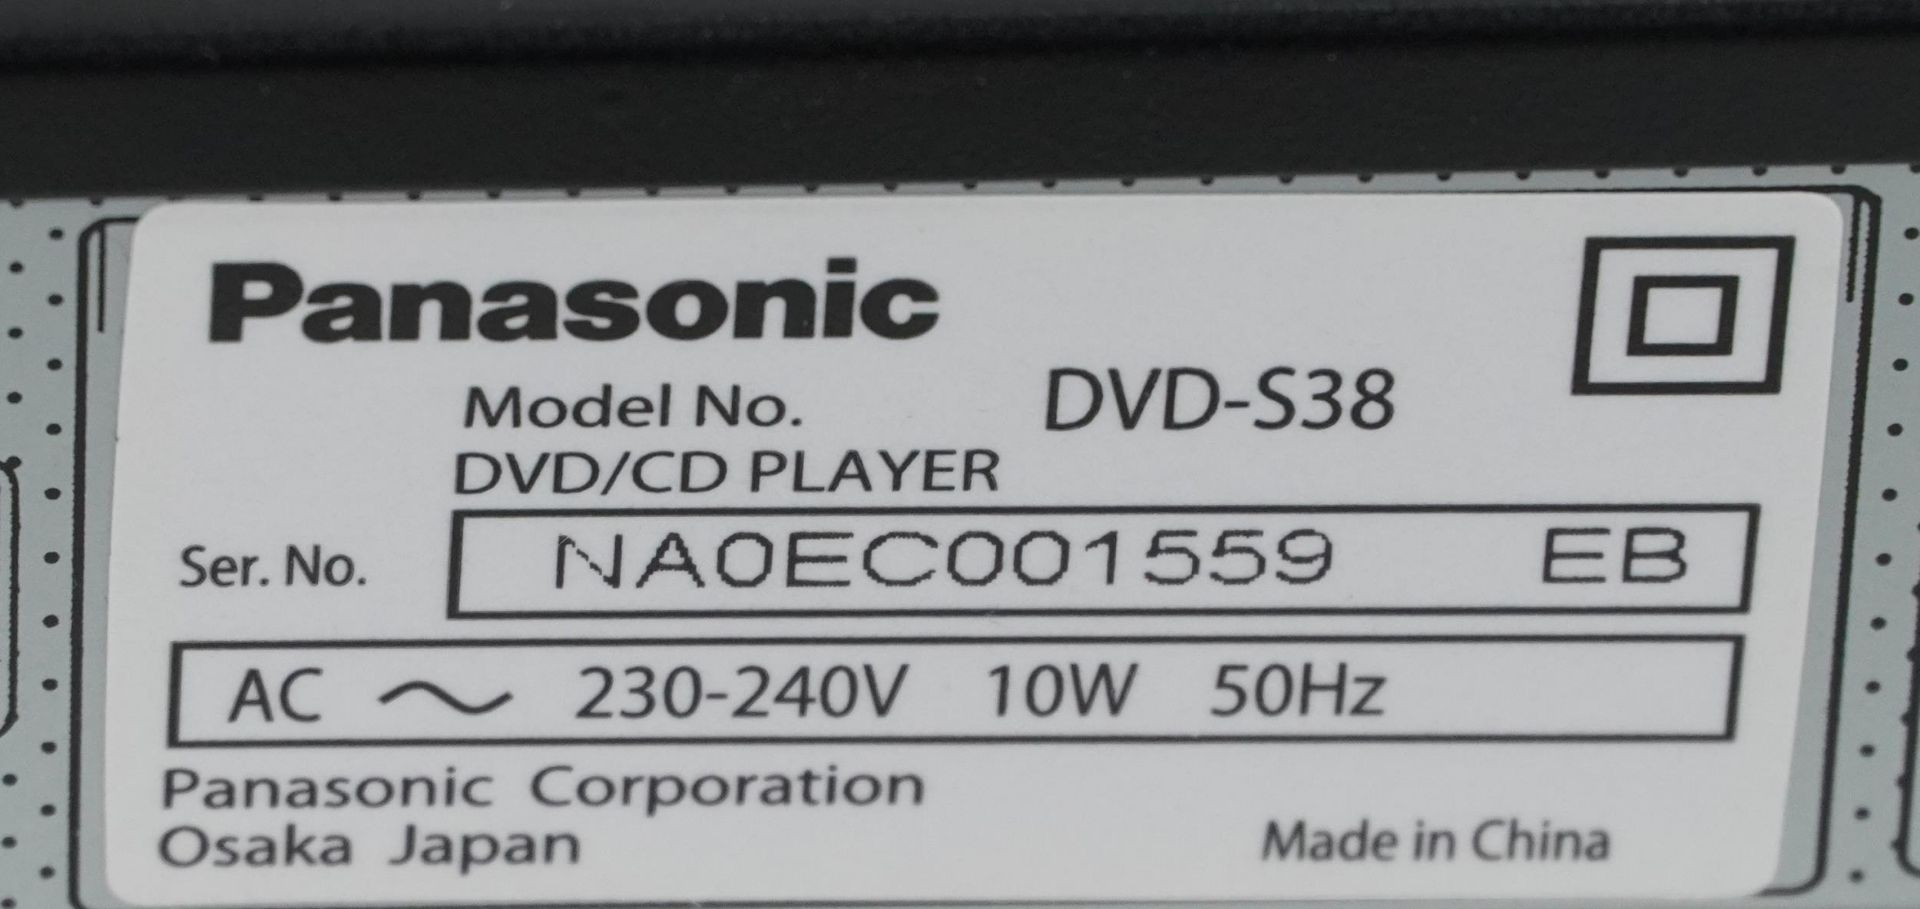 Panasonic 39 inch LCD TV with remote control and DVD player, the TV model TX-L39E6B - Image 4 of 4